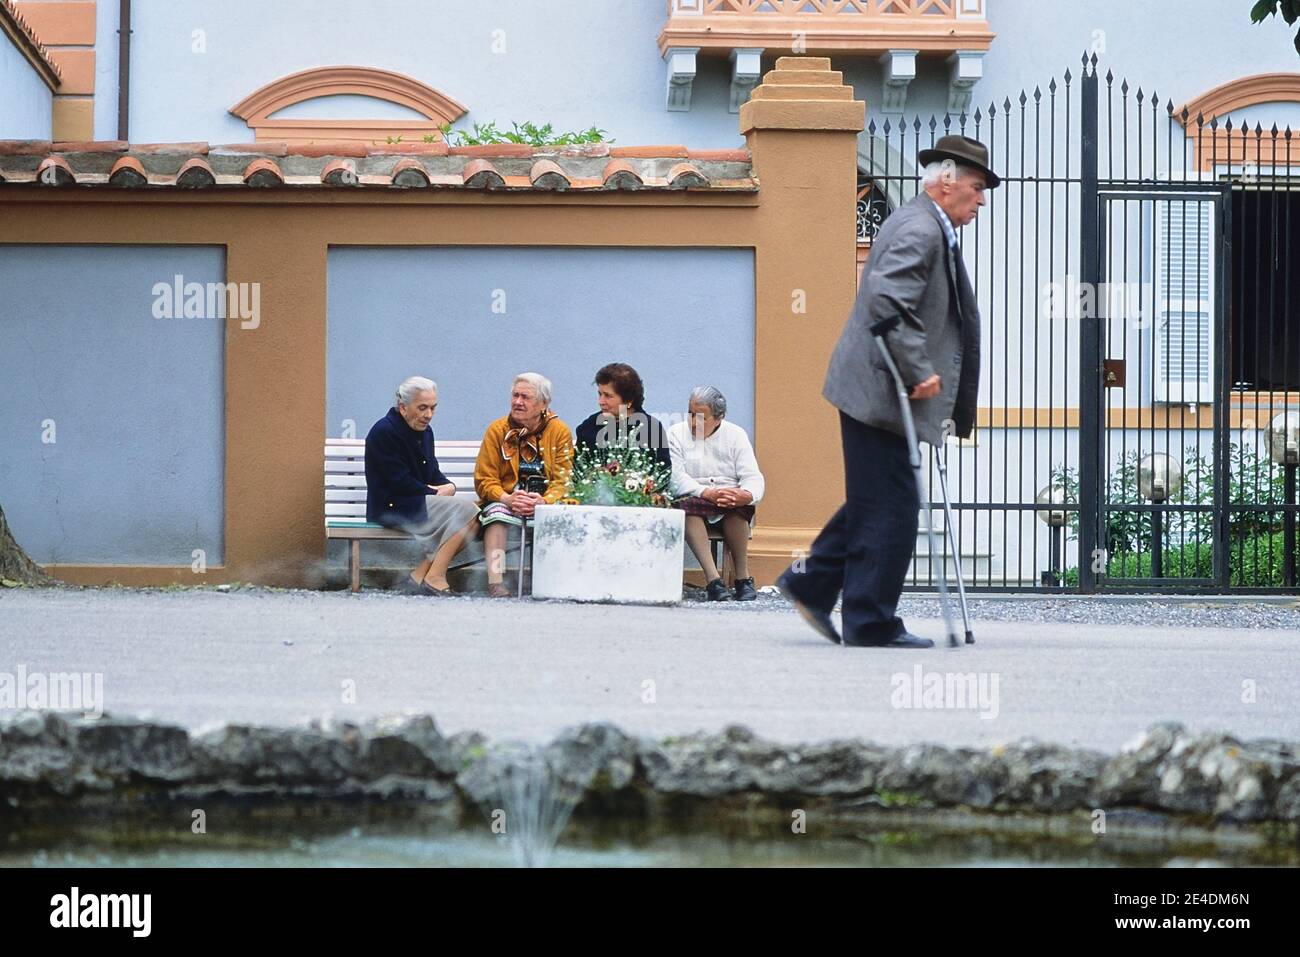 An elderly man with crutches passing four elderly Italian ladies sitting on a public bench having a discussion. Italy Stock Photo